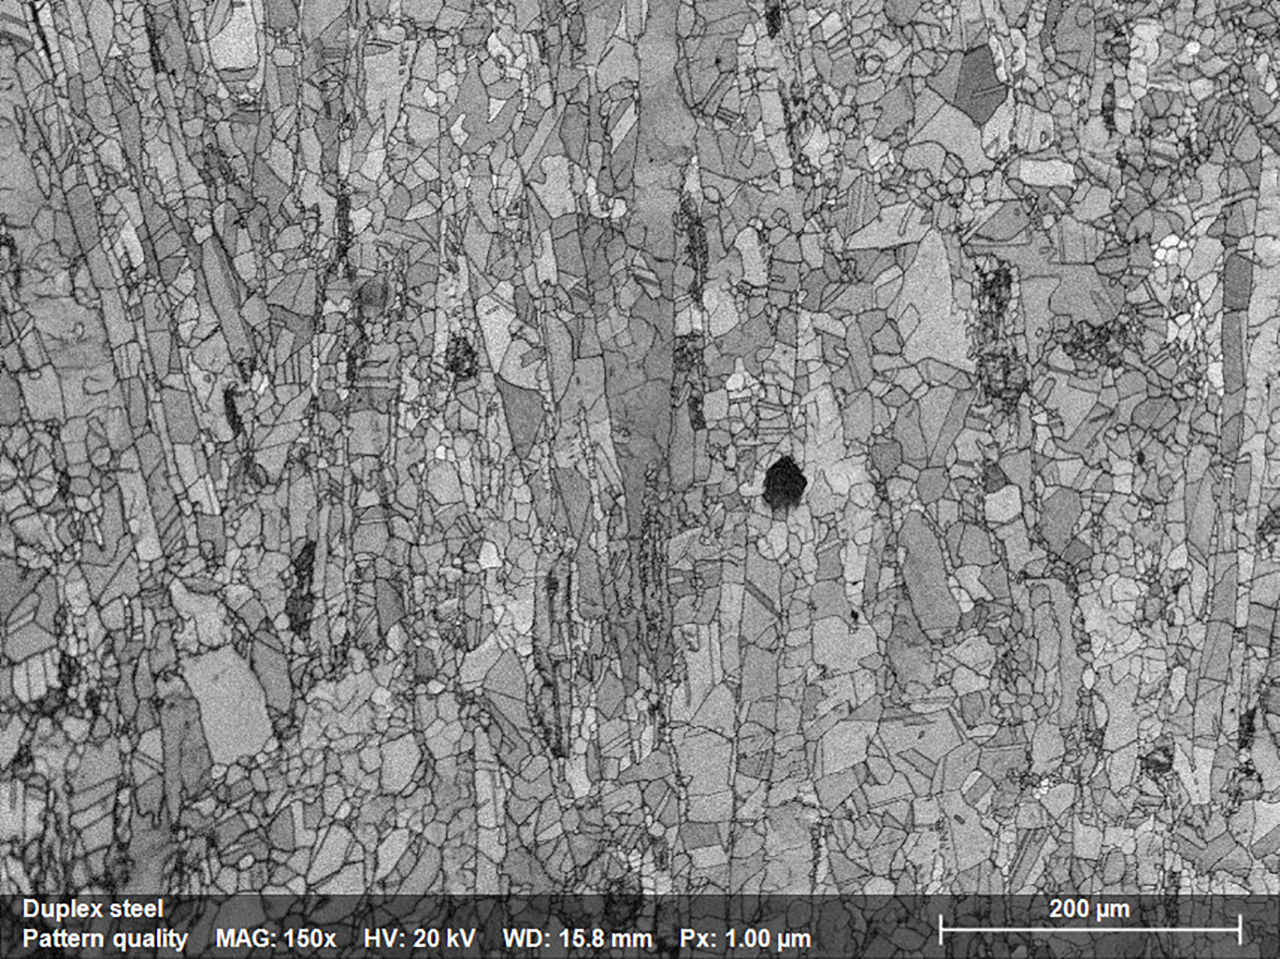 Fig. 1.1: Pattern Quality Map depicting the microstructure of a stainless steel sample; map was acquired using e-Flash XS EBSD detector mounted on JSM IT200 SEM.